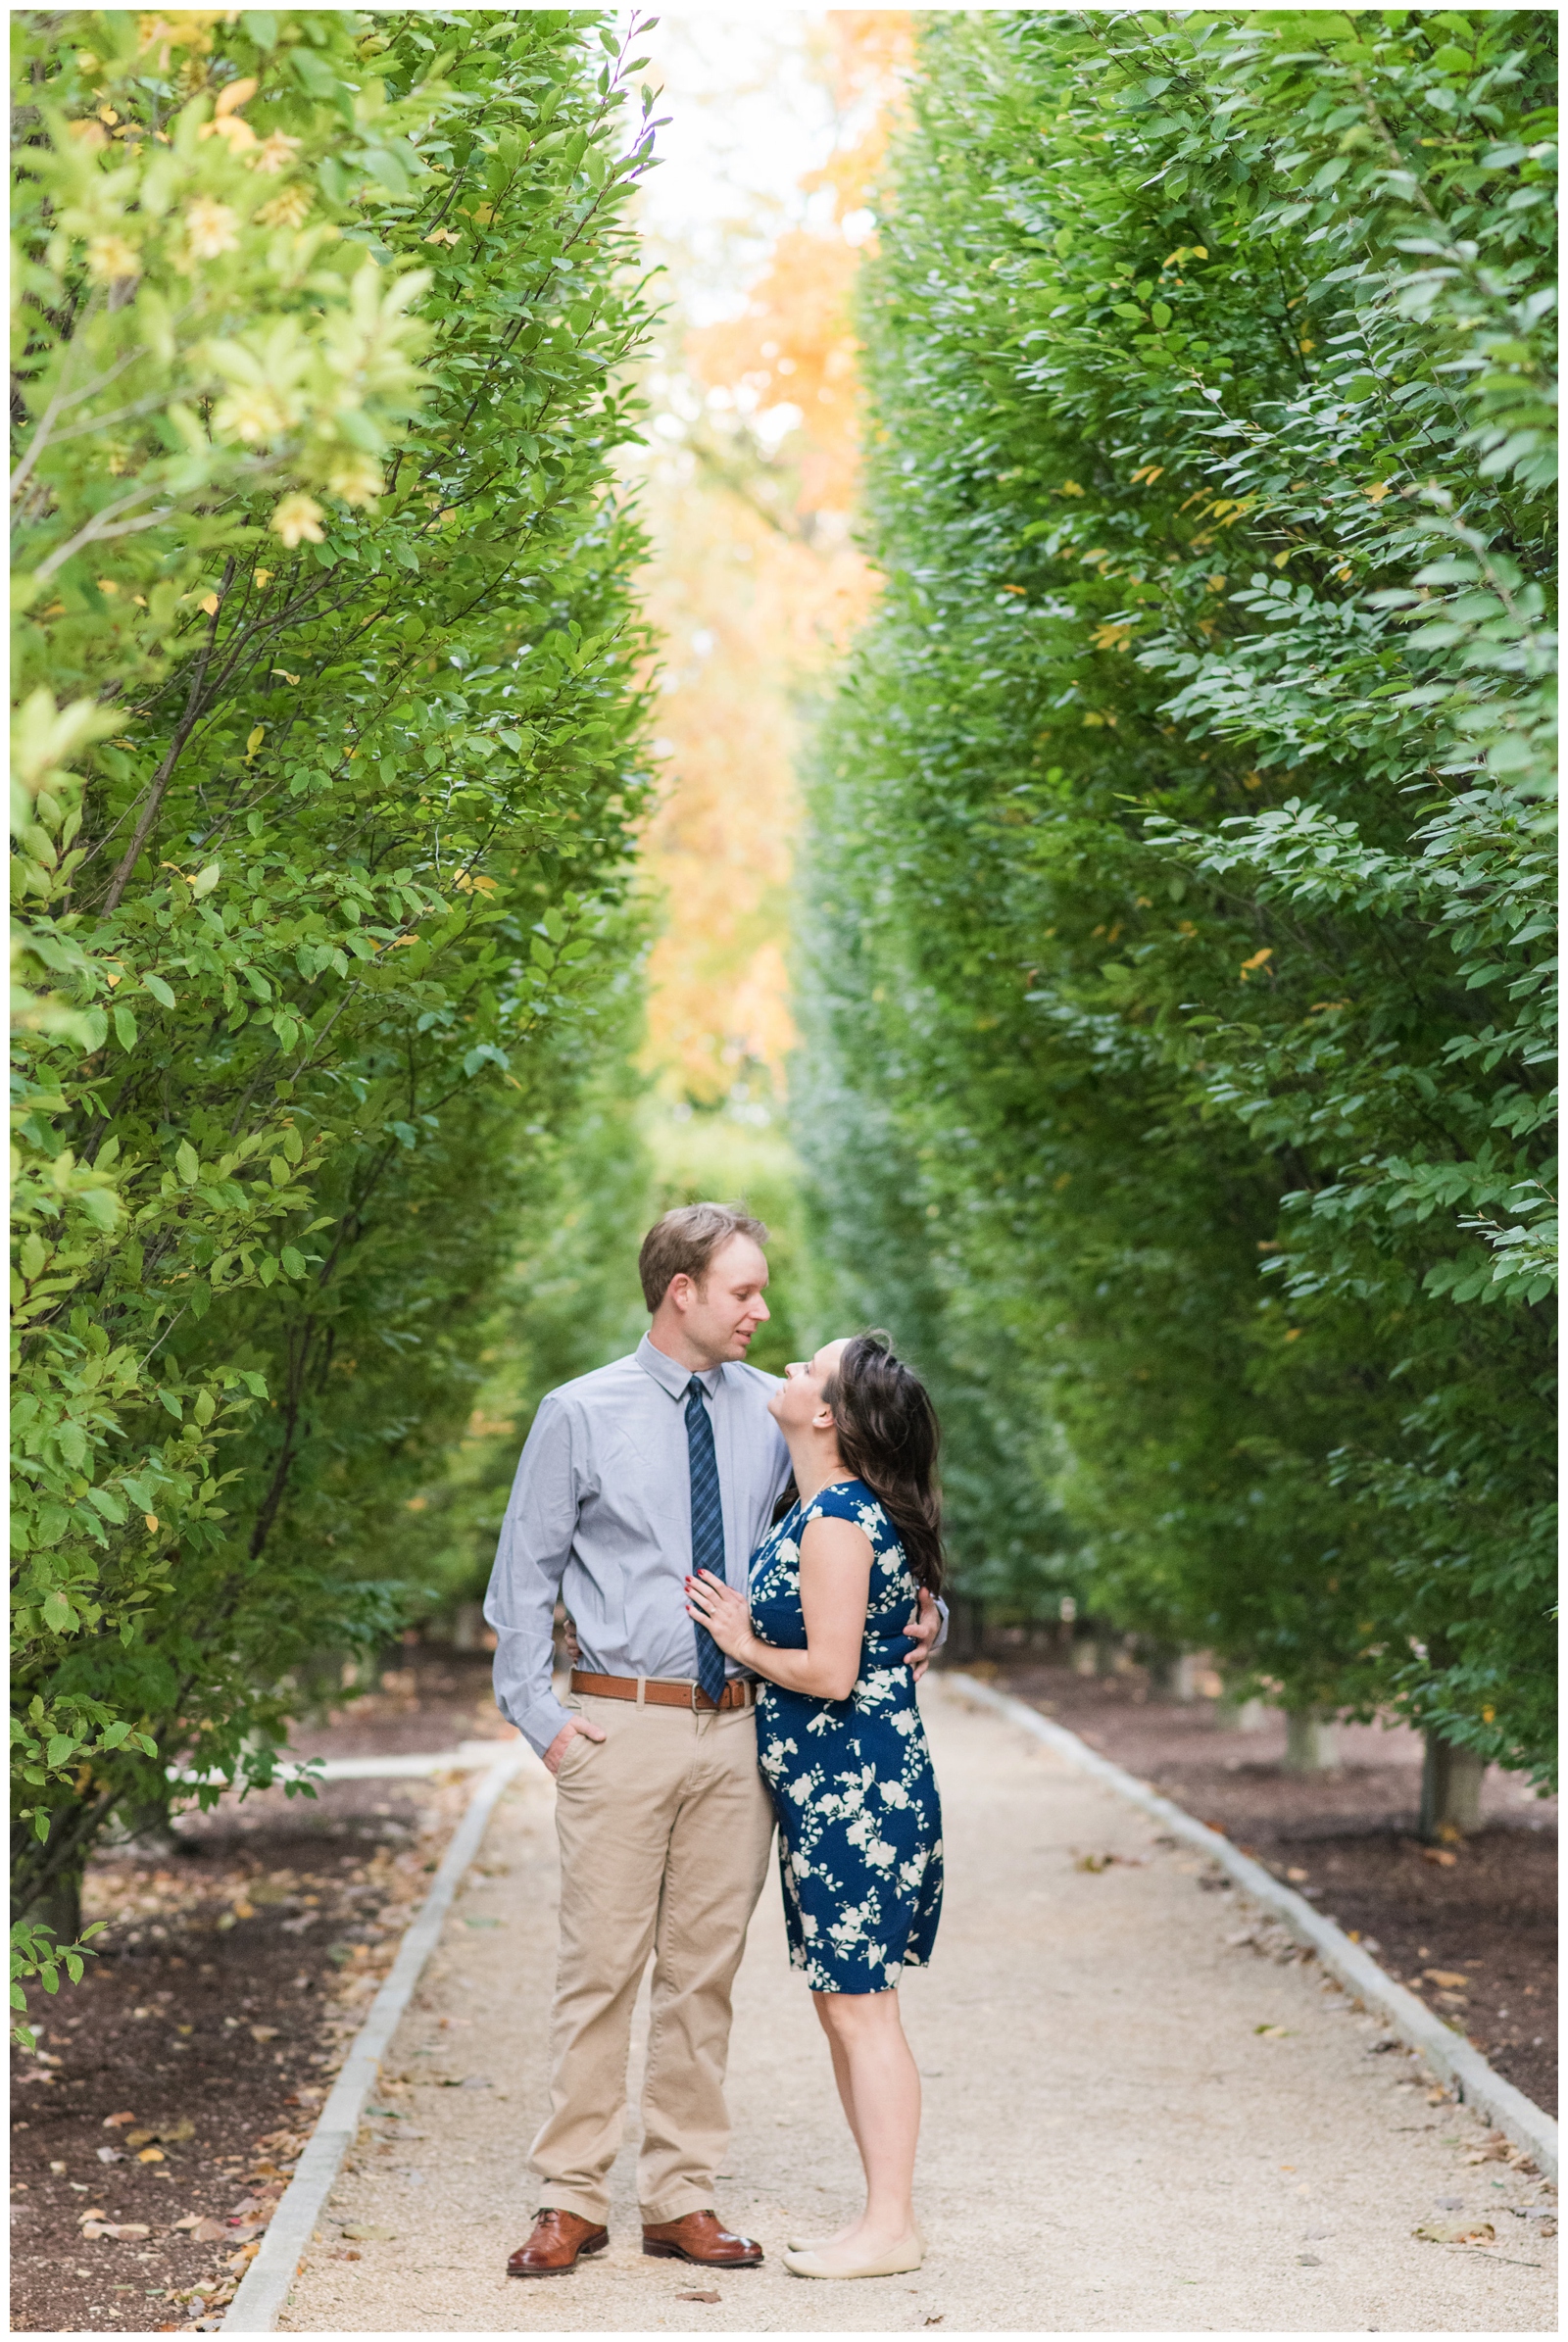 Franklin Park Conservatory engagement portraits with bride in blue dress smiling at groom in blue shirt